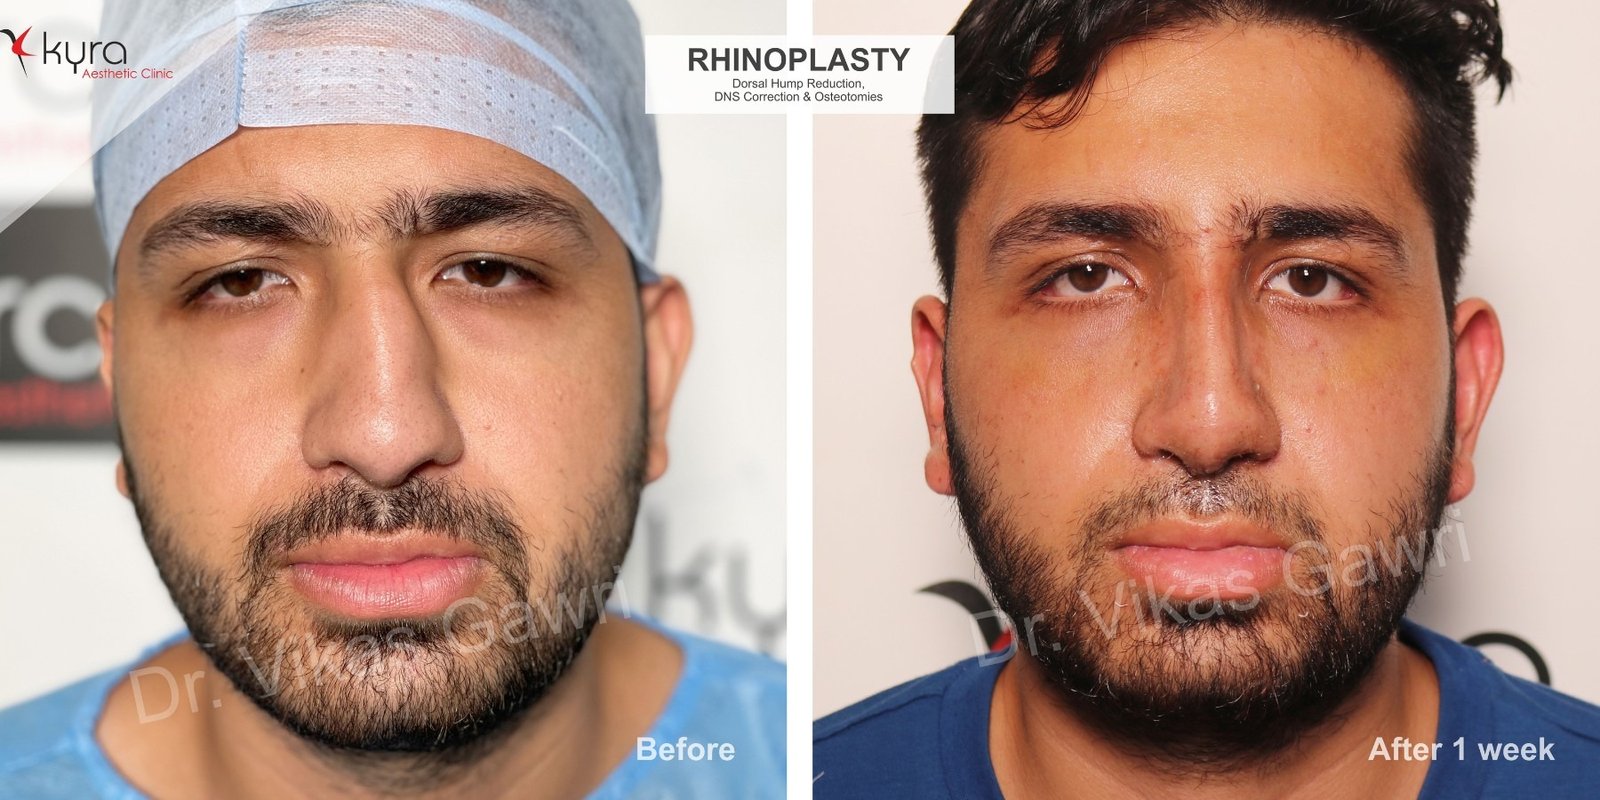 rhinoplasty dorsal hump reduction kyra clinic patient3 front1 1800x900 1